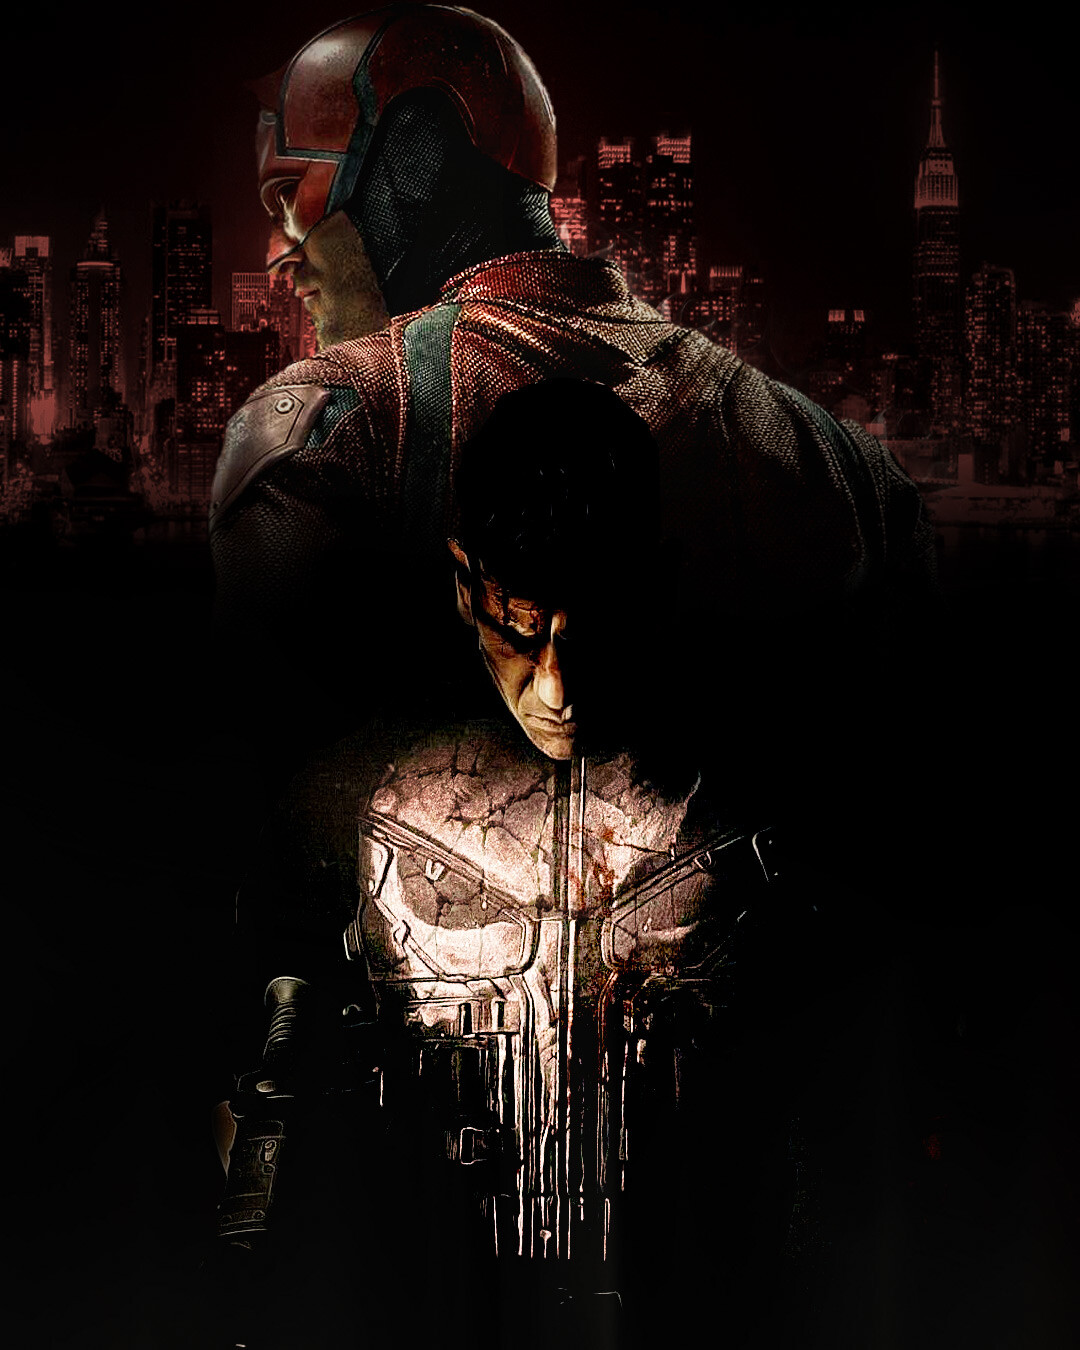 The Punisher In Daredevil Wallpapers